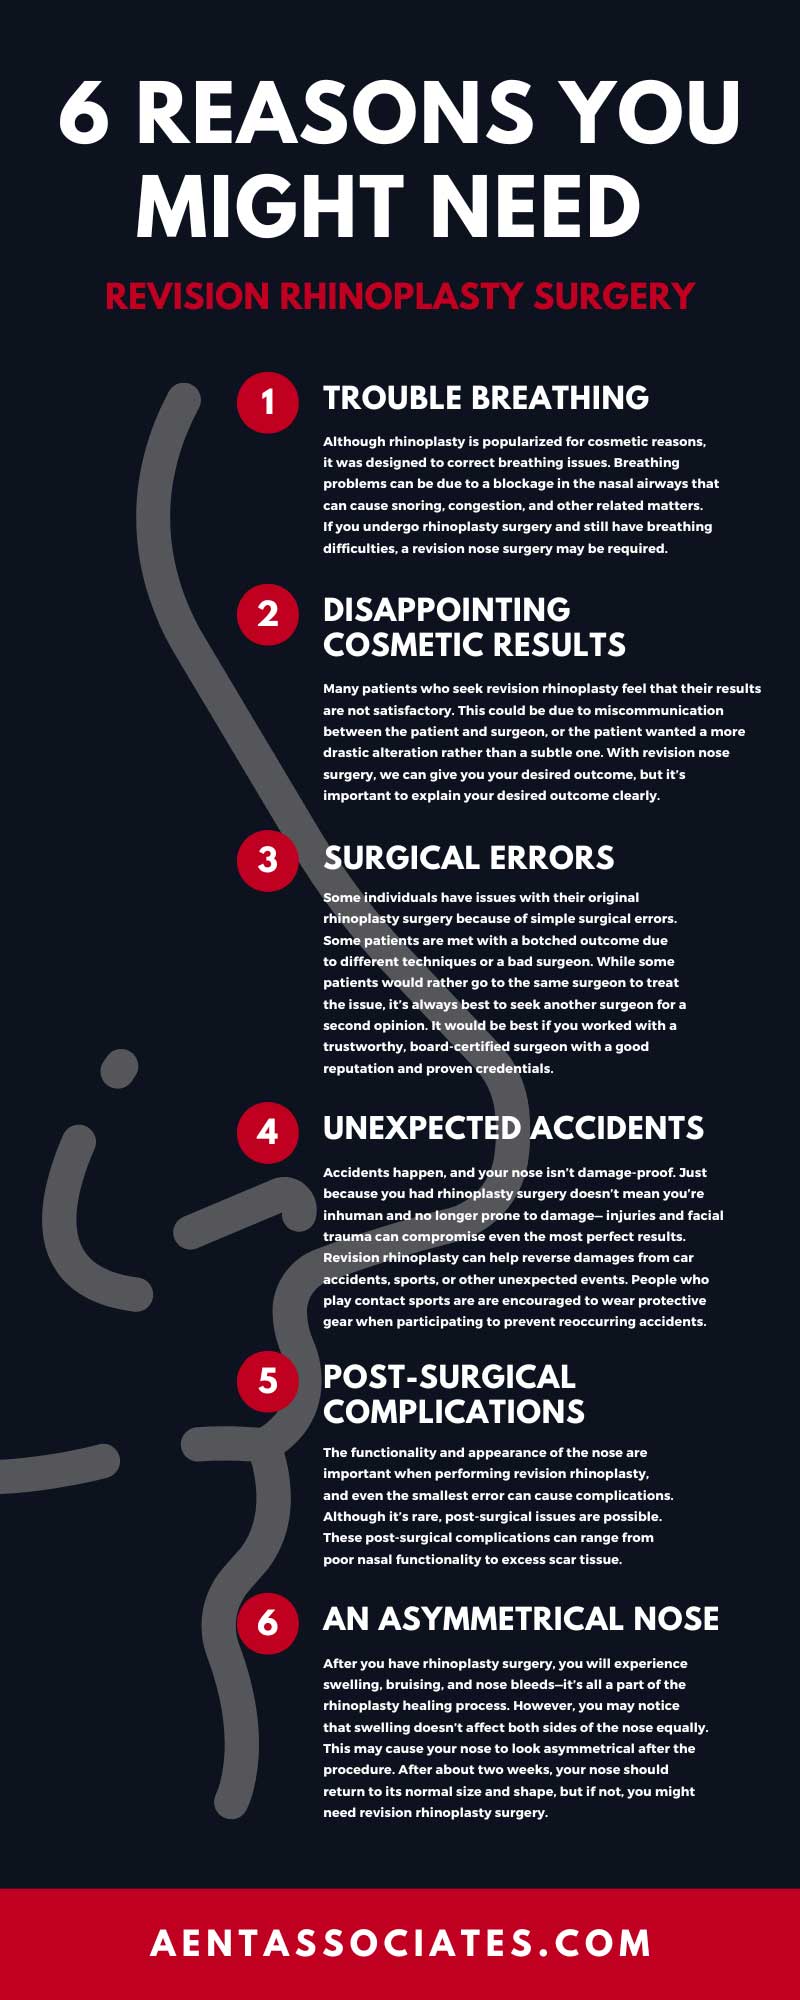 6 Reasons You Might Need Revision Rhinoplasty Surgery